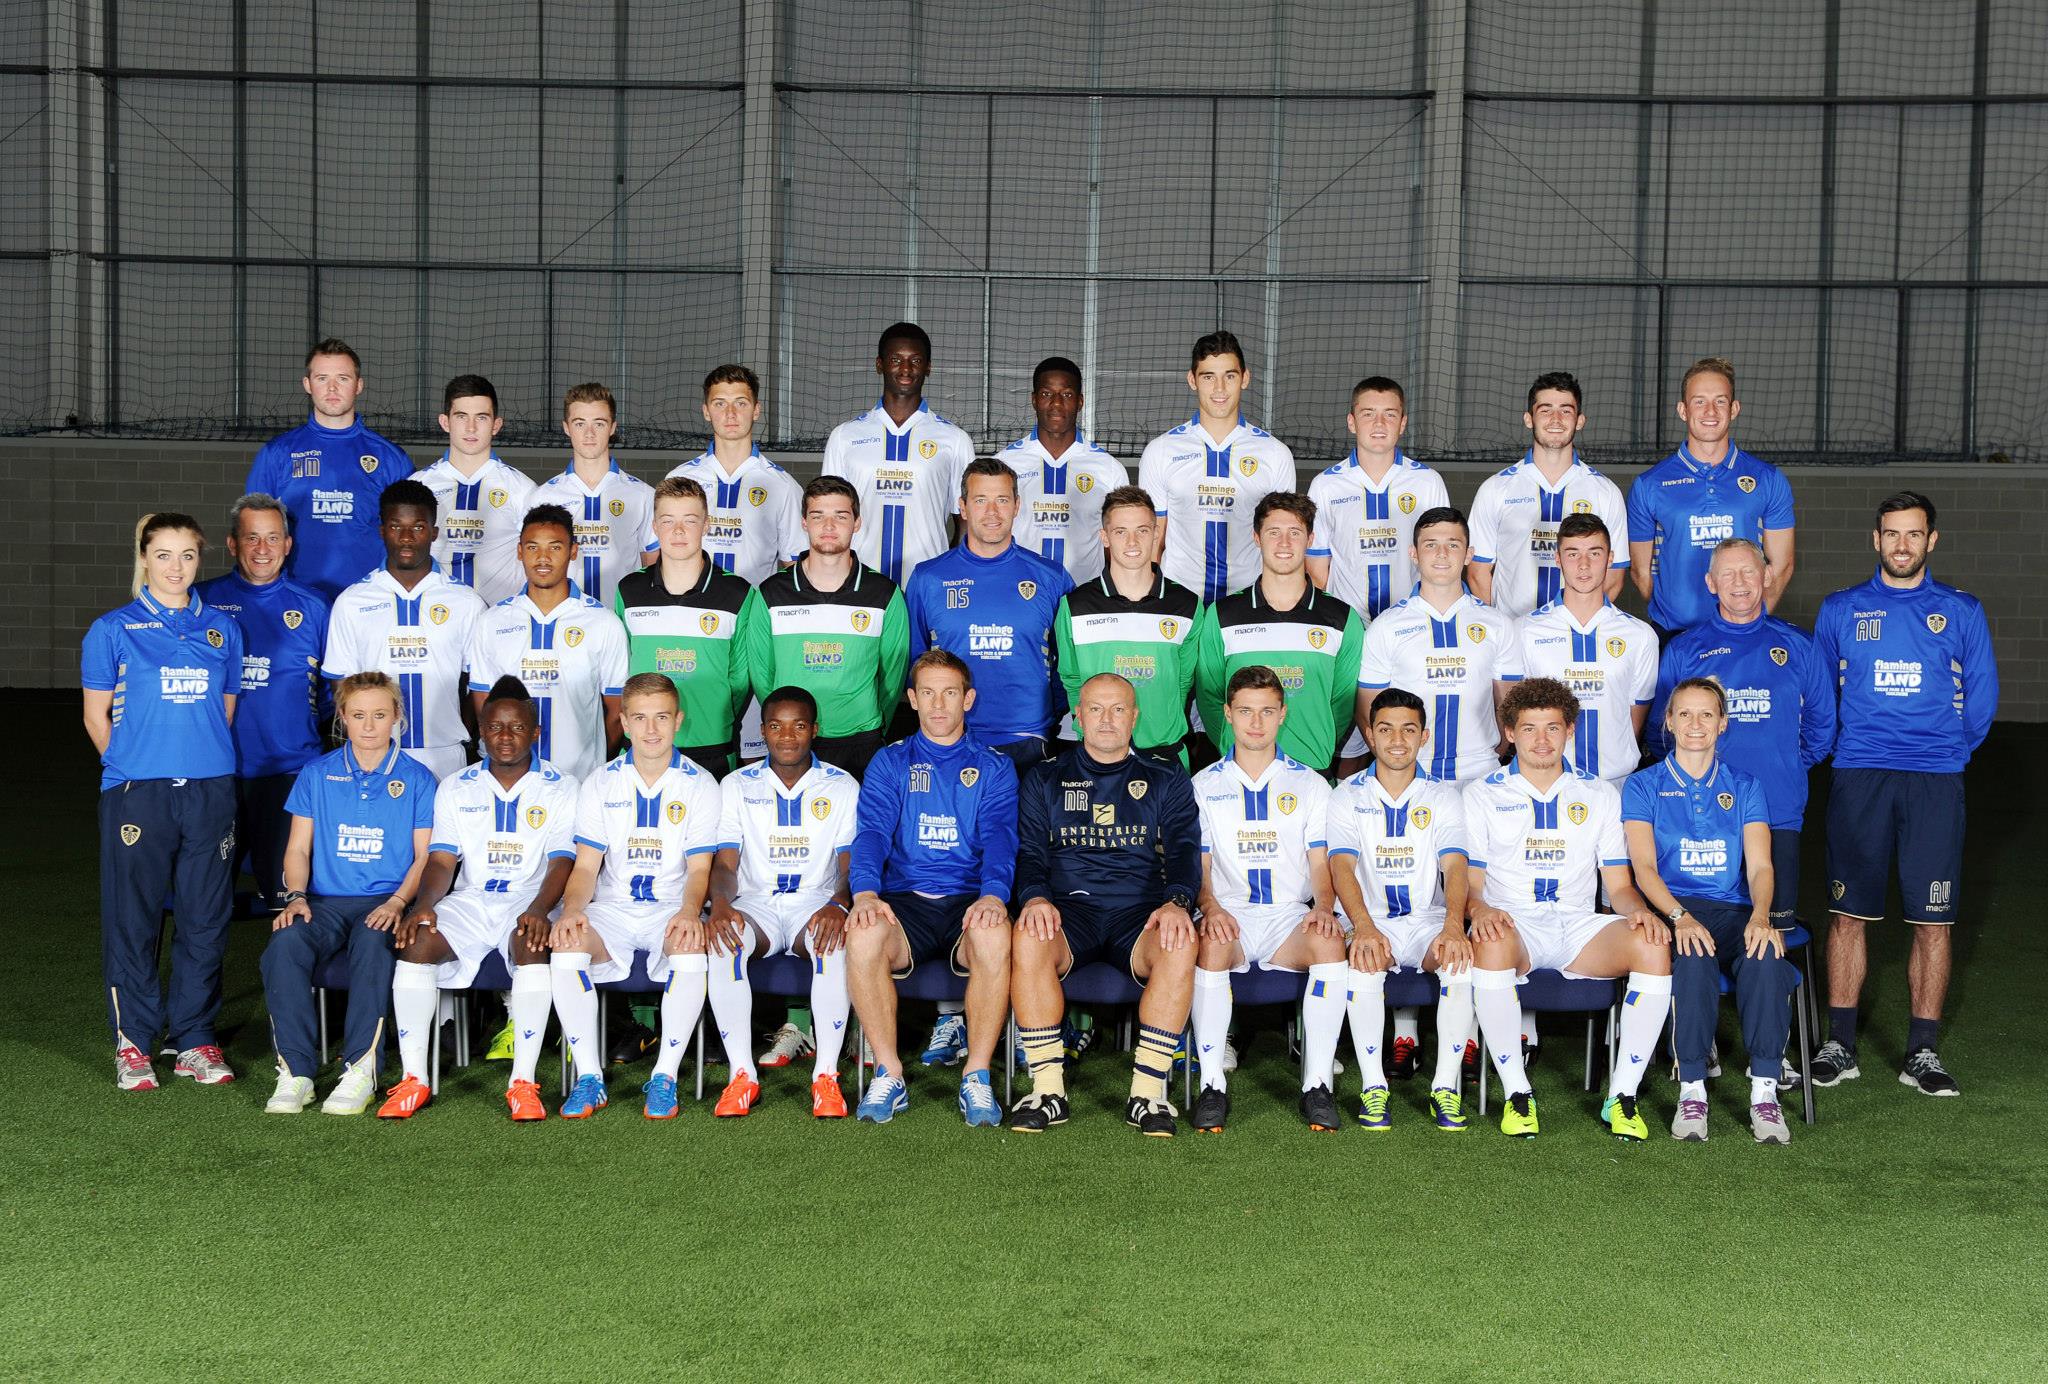 Leeds Academy team: Cook is back row, second from the left